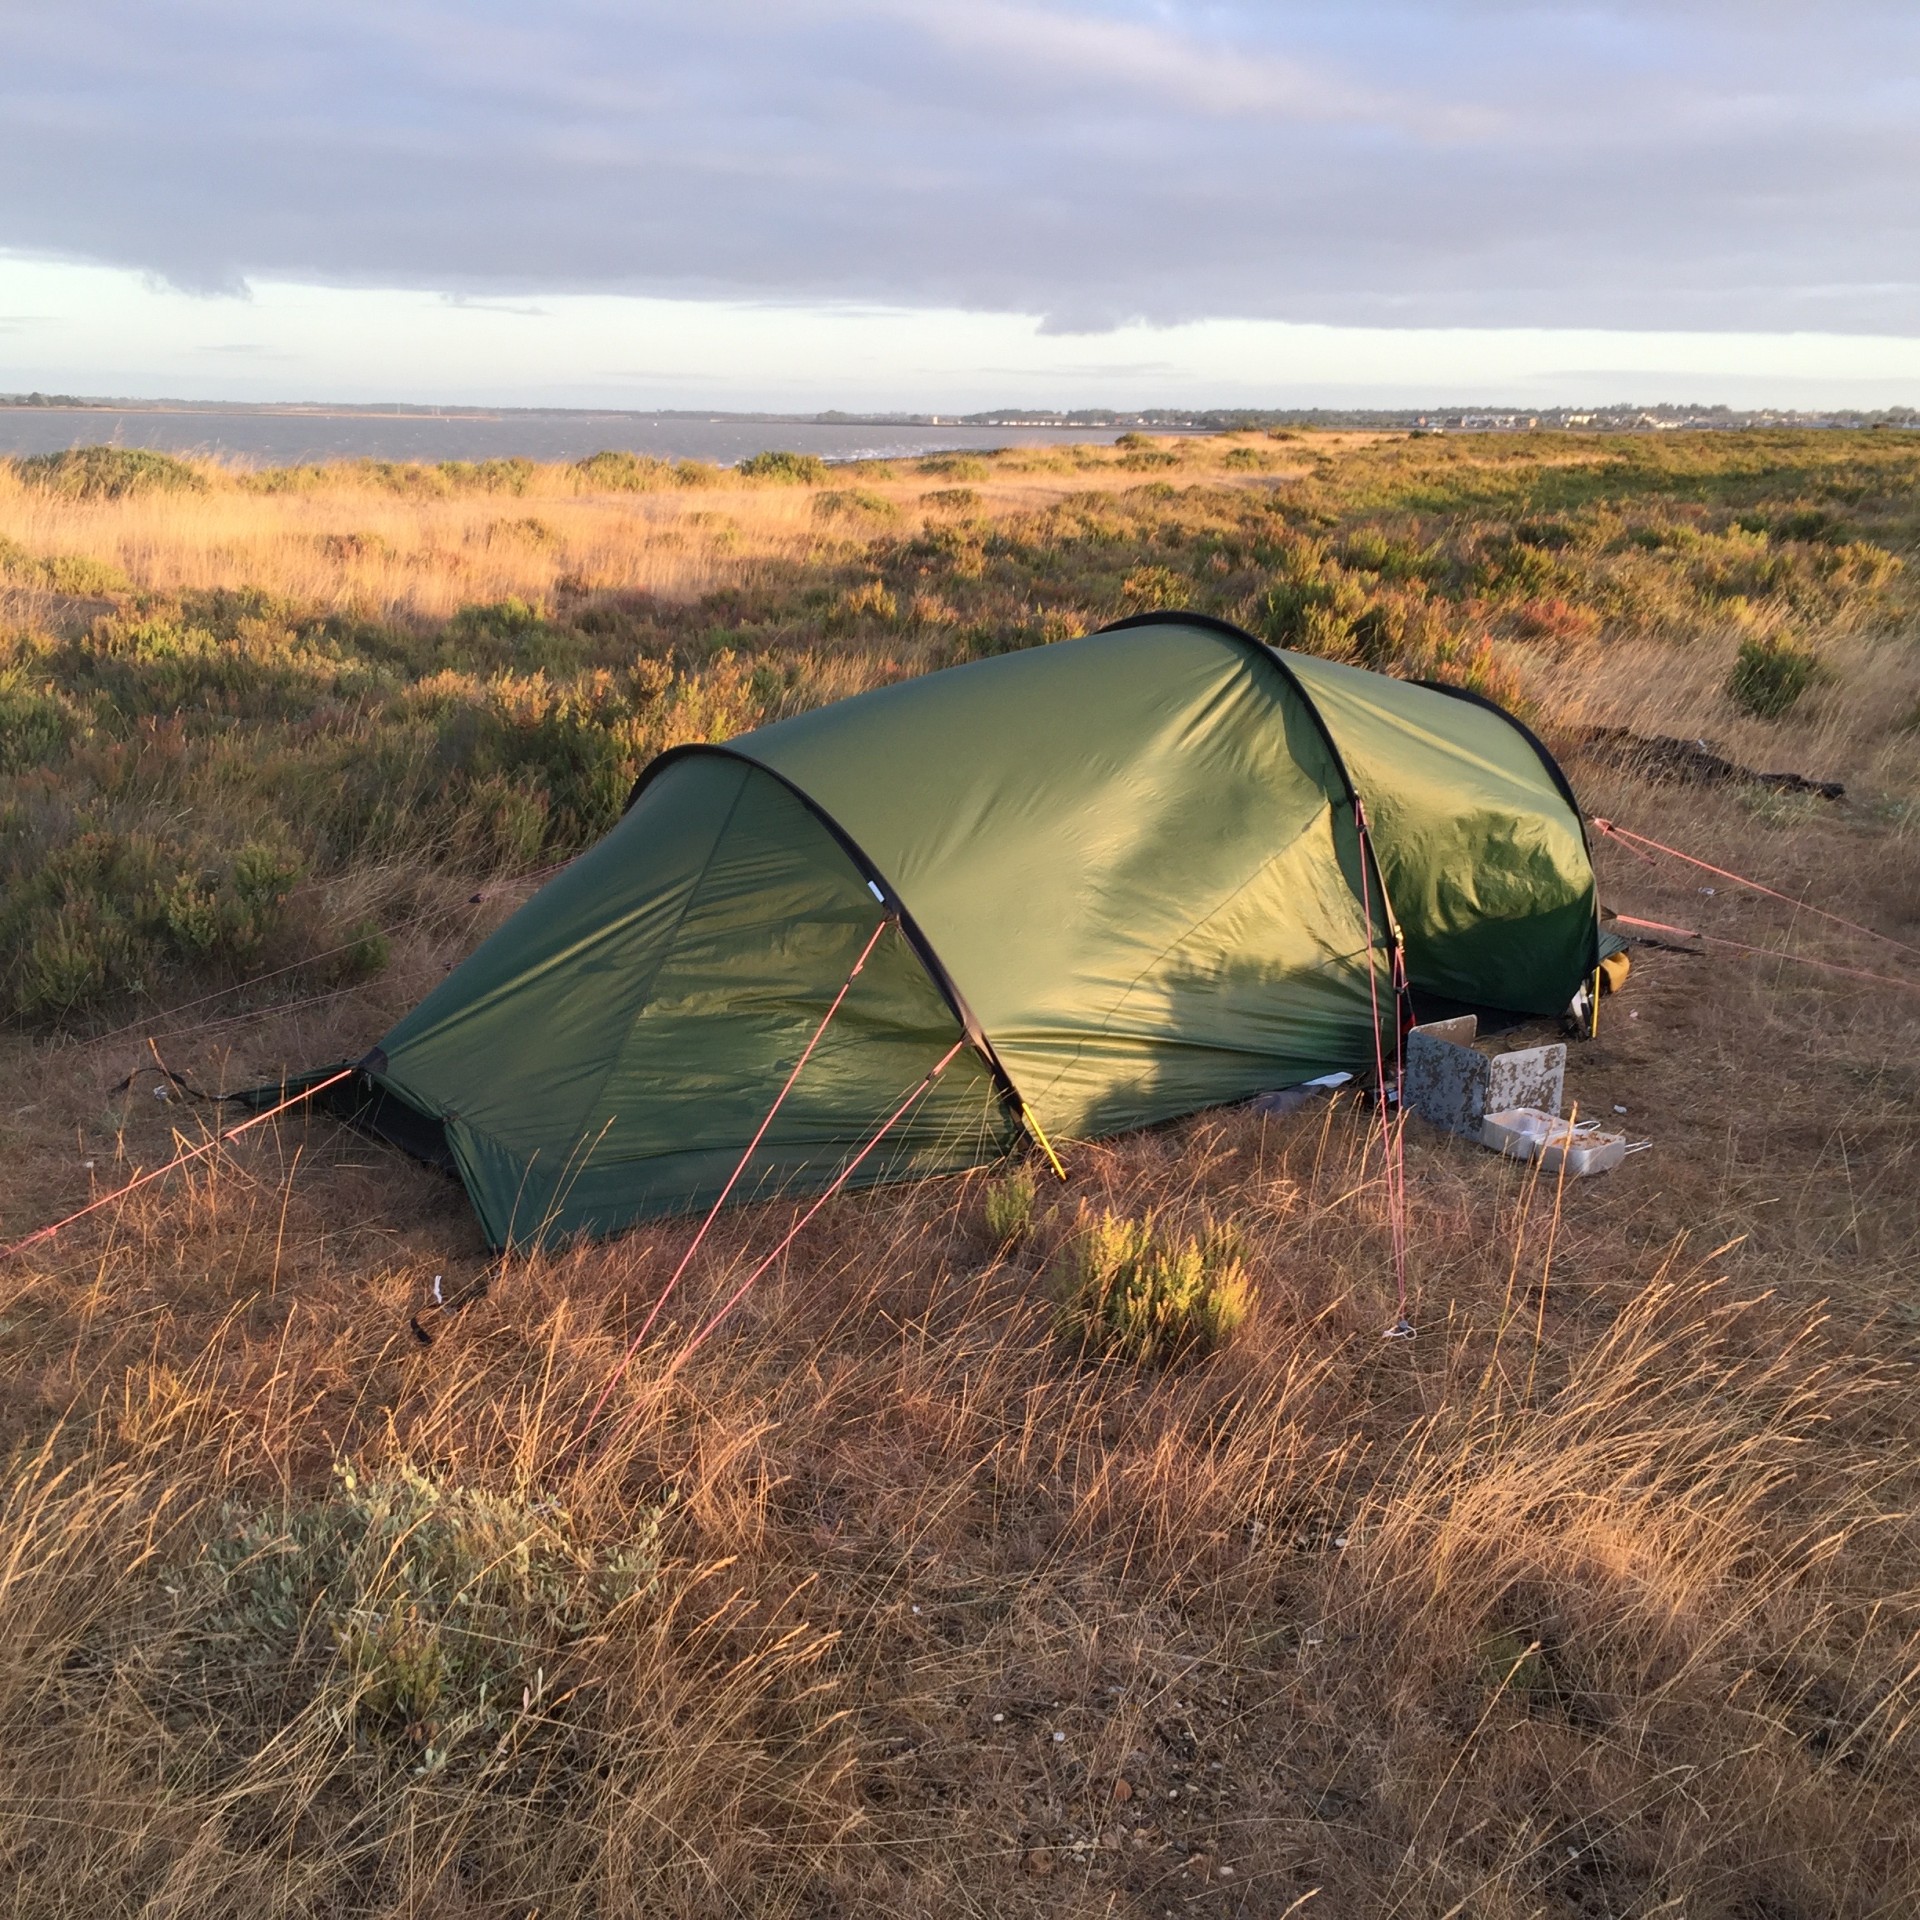 Hilleberg tent off the beach on our wild camping weekend.